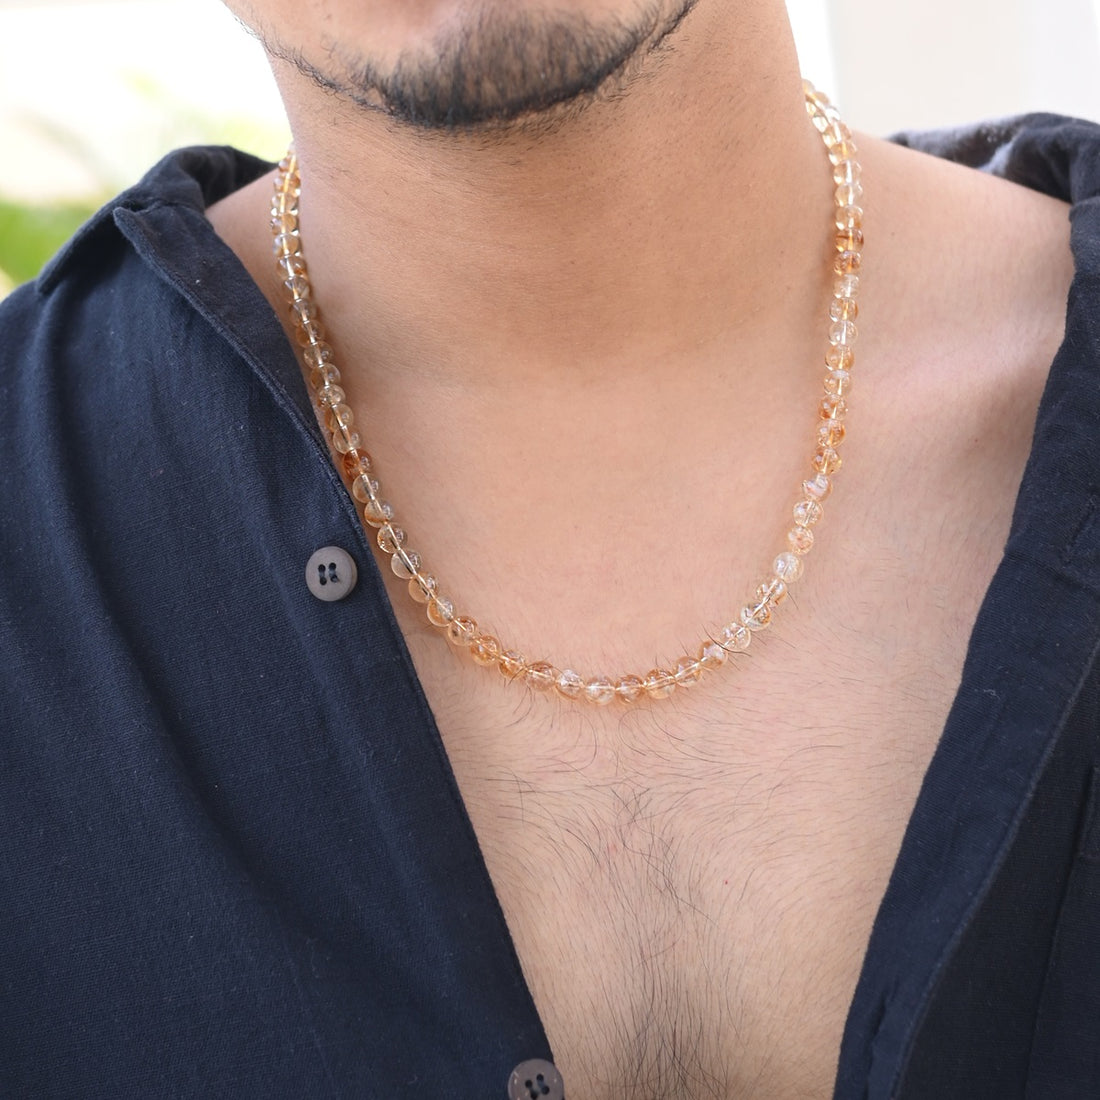 Men's Citrine Gemstone Silver Necklace: Smooth round beads with silver lock